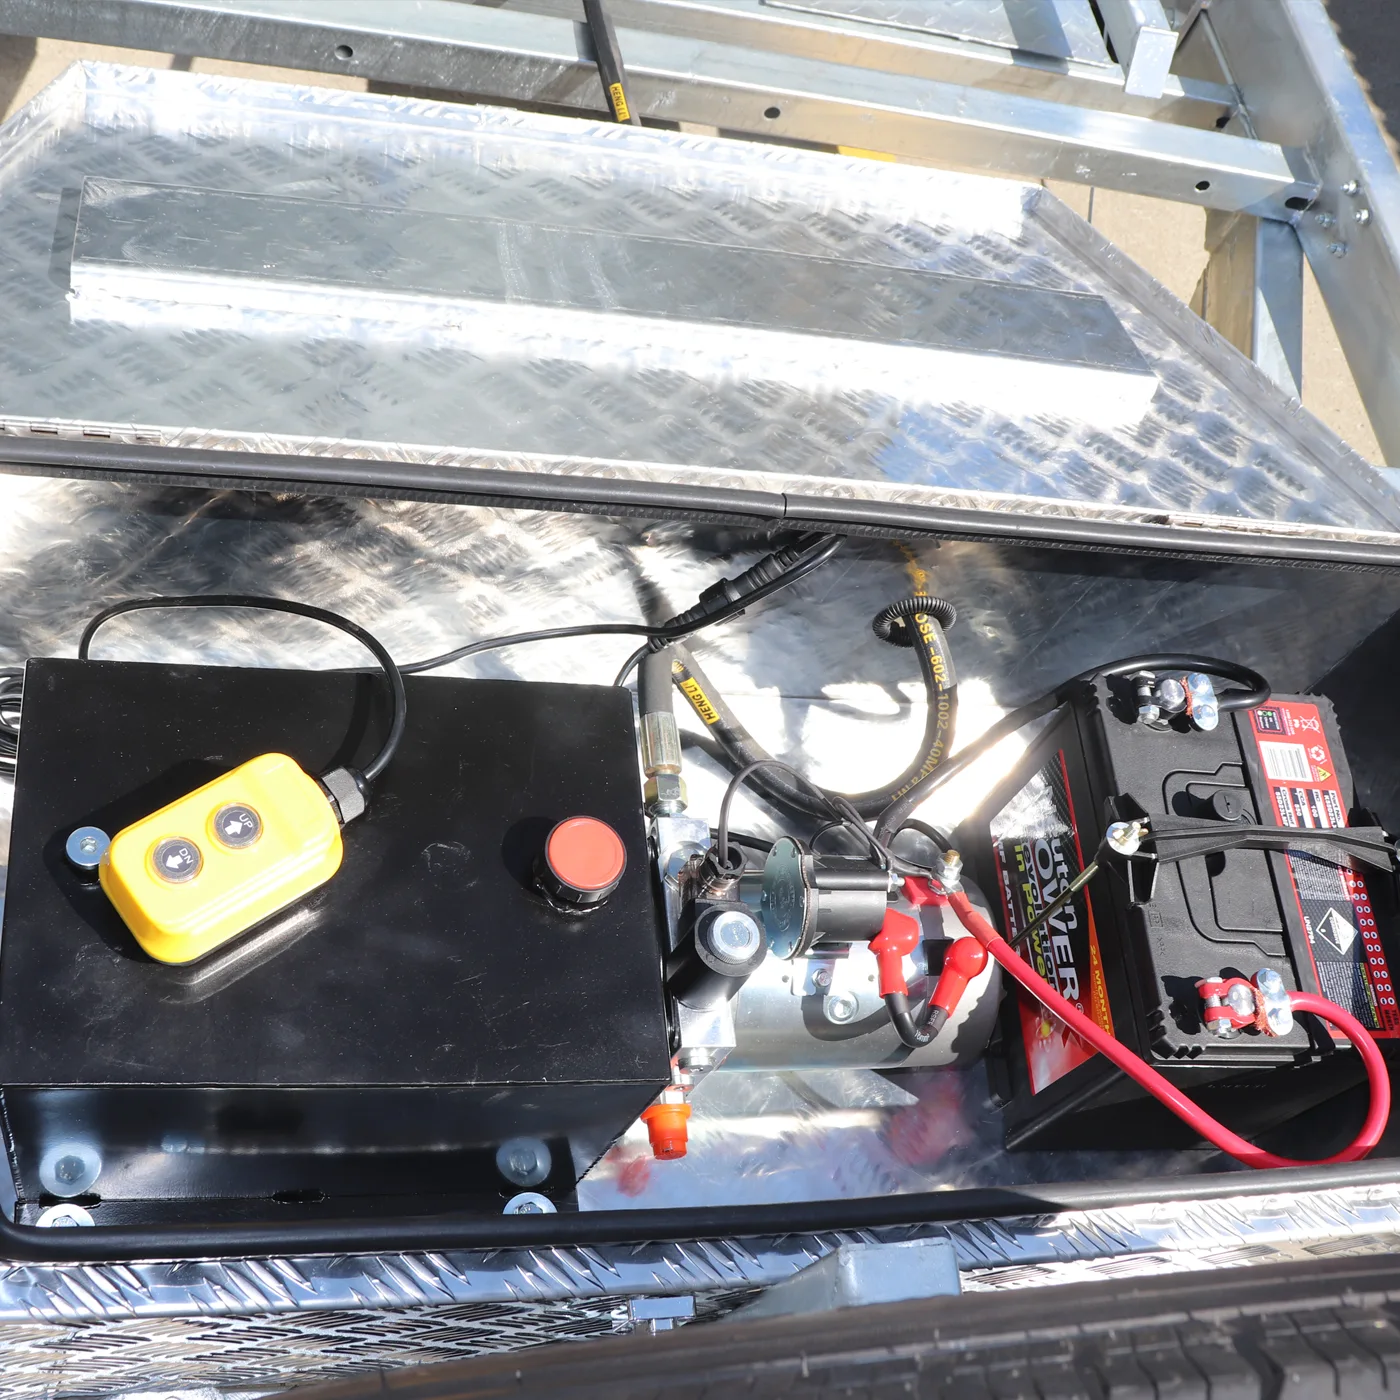 Tipping Remote & Battery in Toolbox of Hydraulic Tipper Trailer